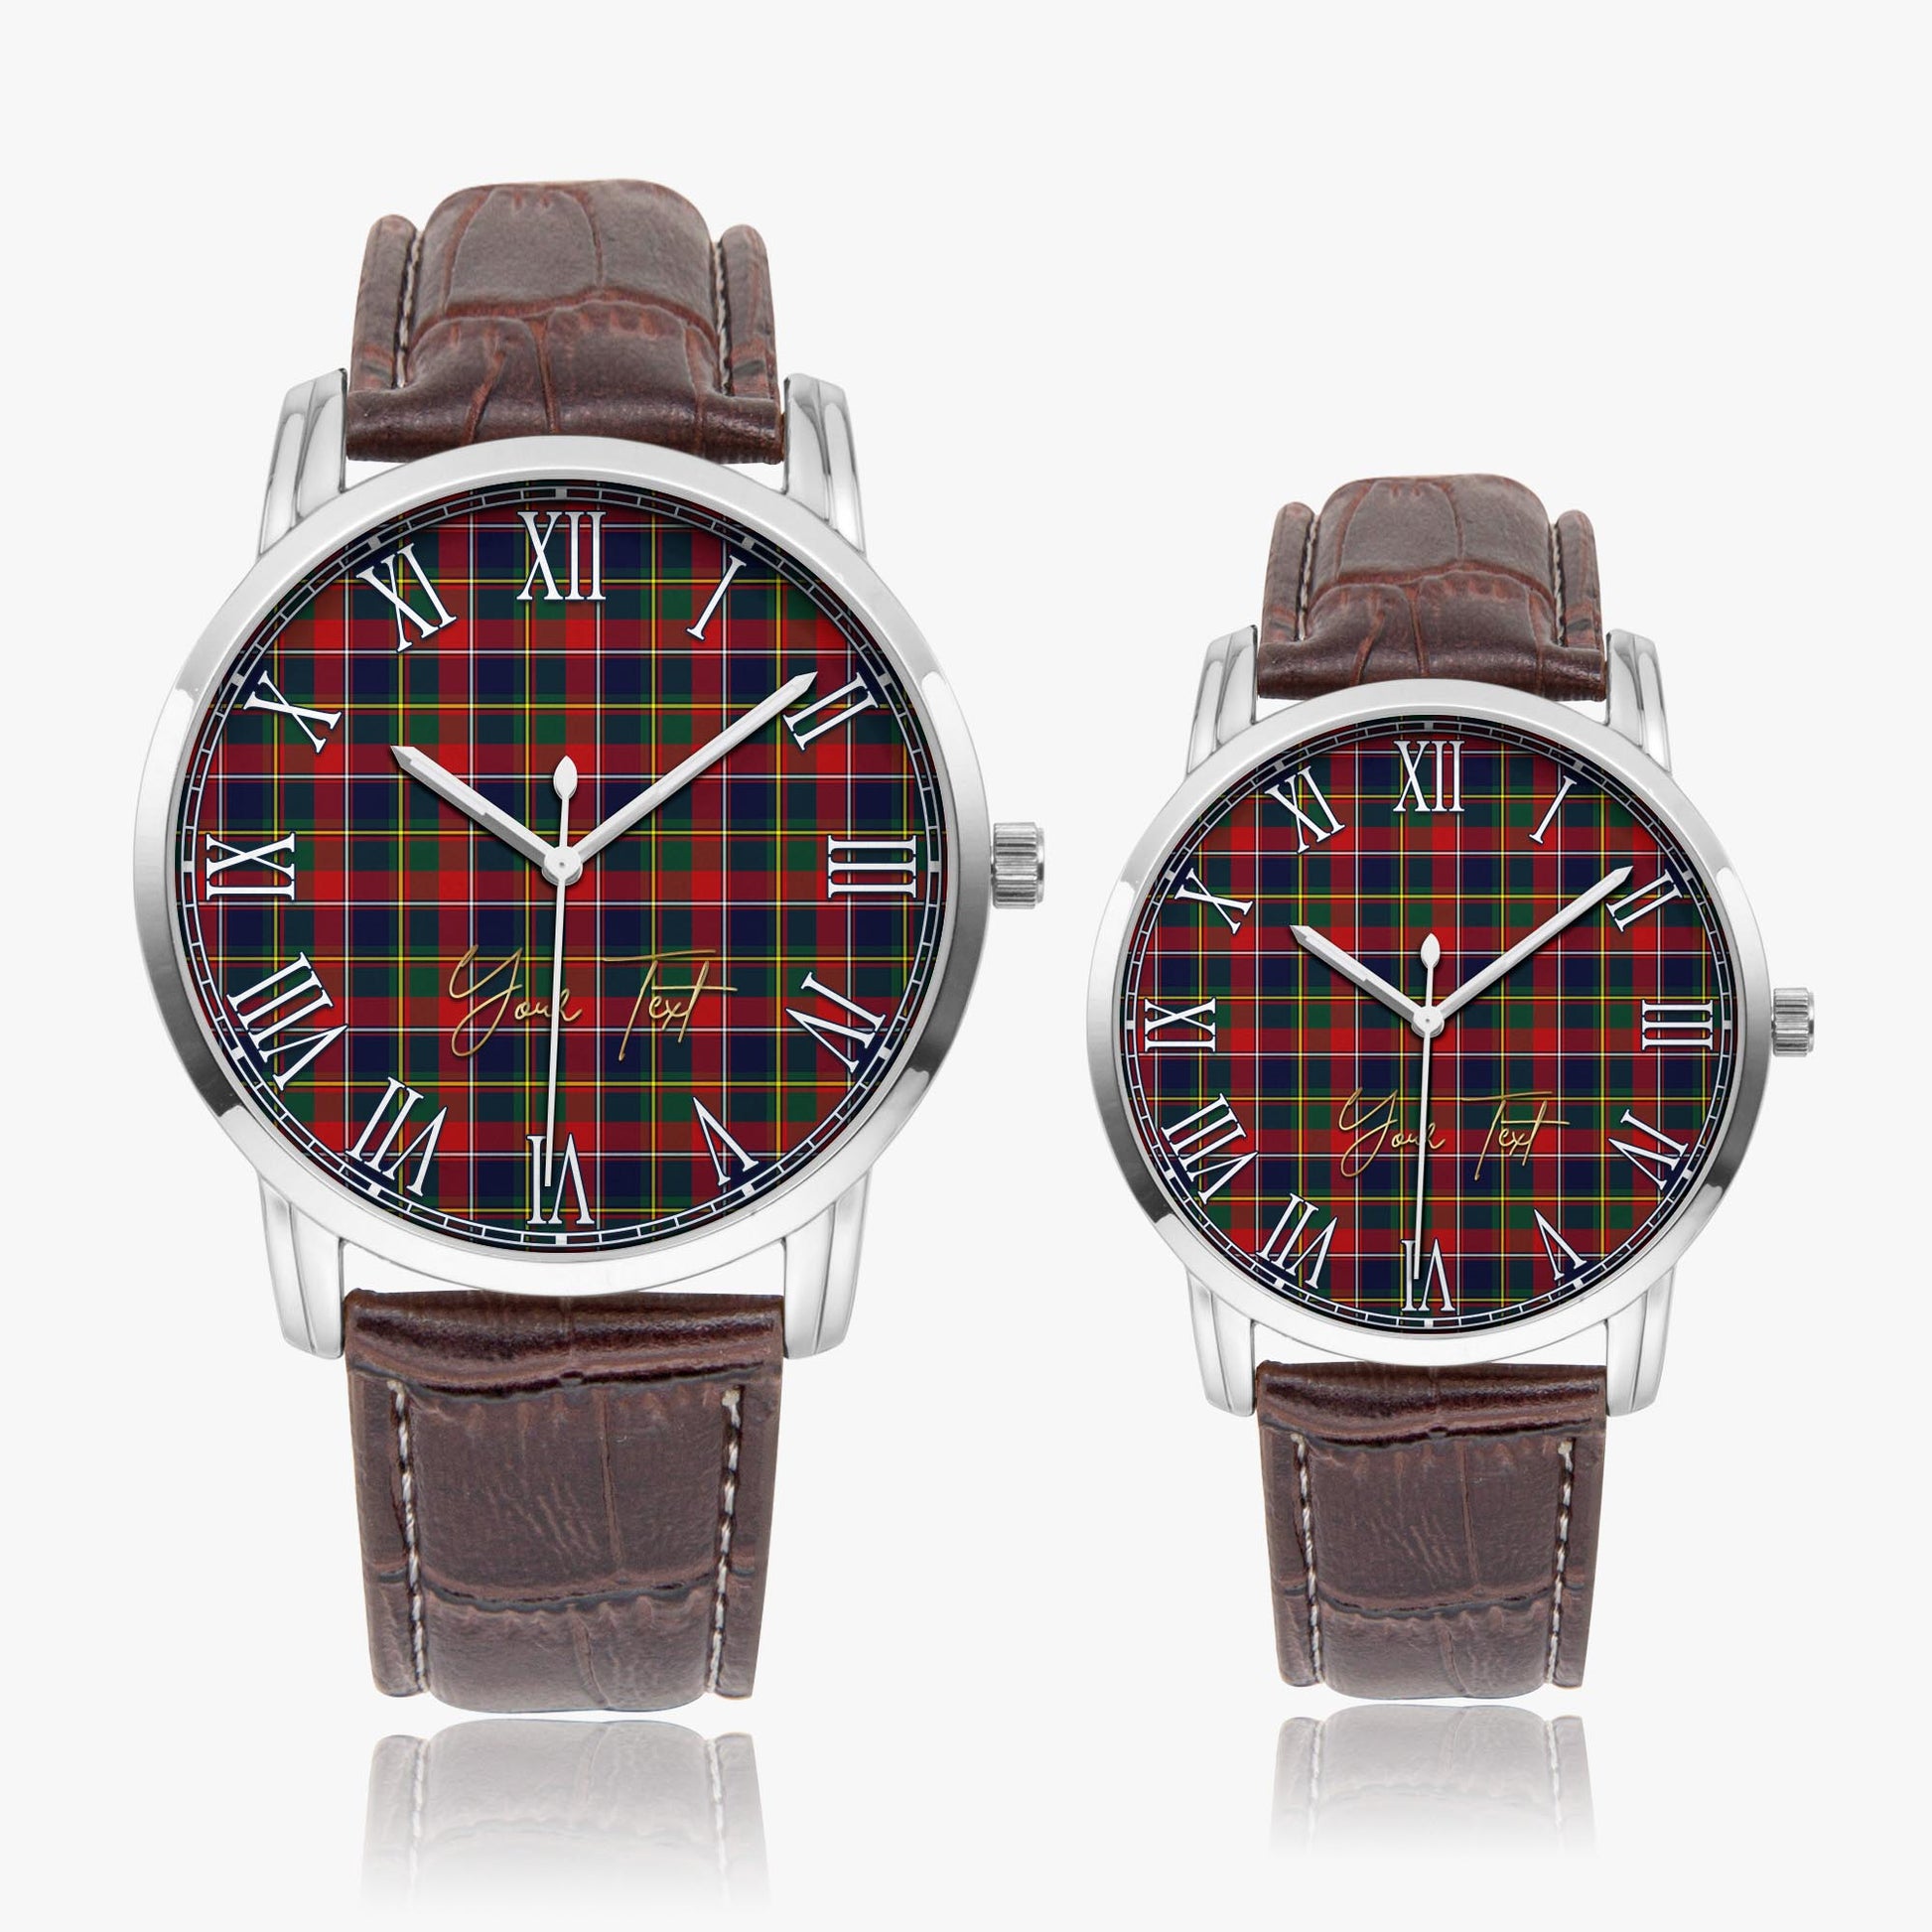 Quebec Province Canada Tartan Personalized Your Text Leather Trap Quartz Watch Wide Type Silver Case With Brown Leather Strap - Tartanvibesclothing